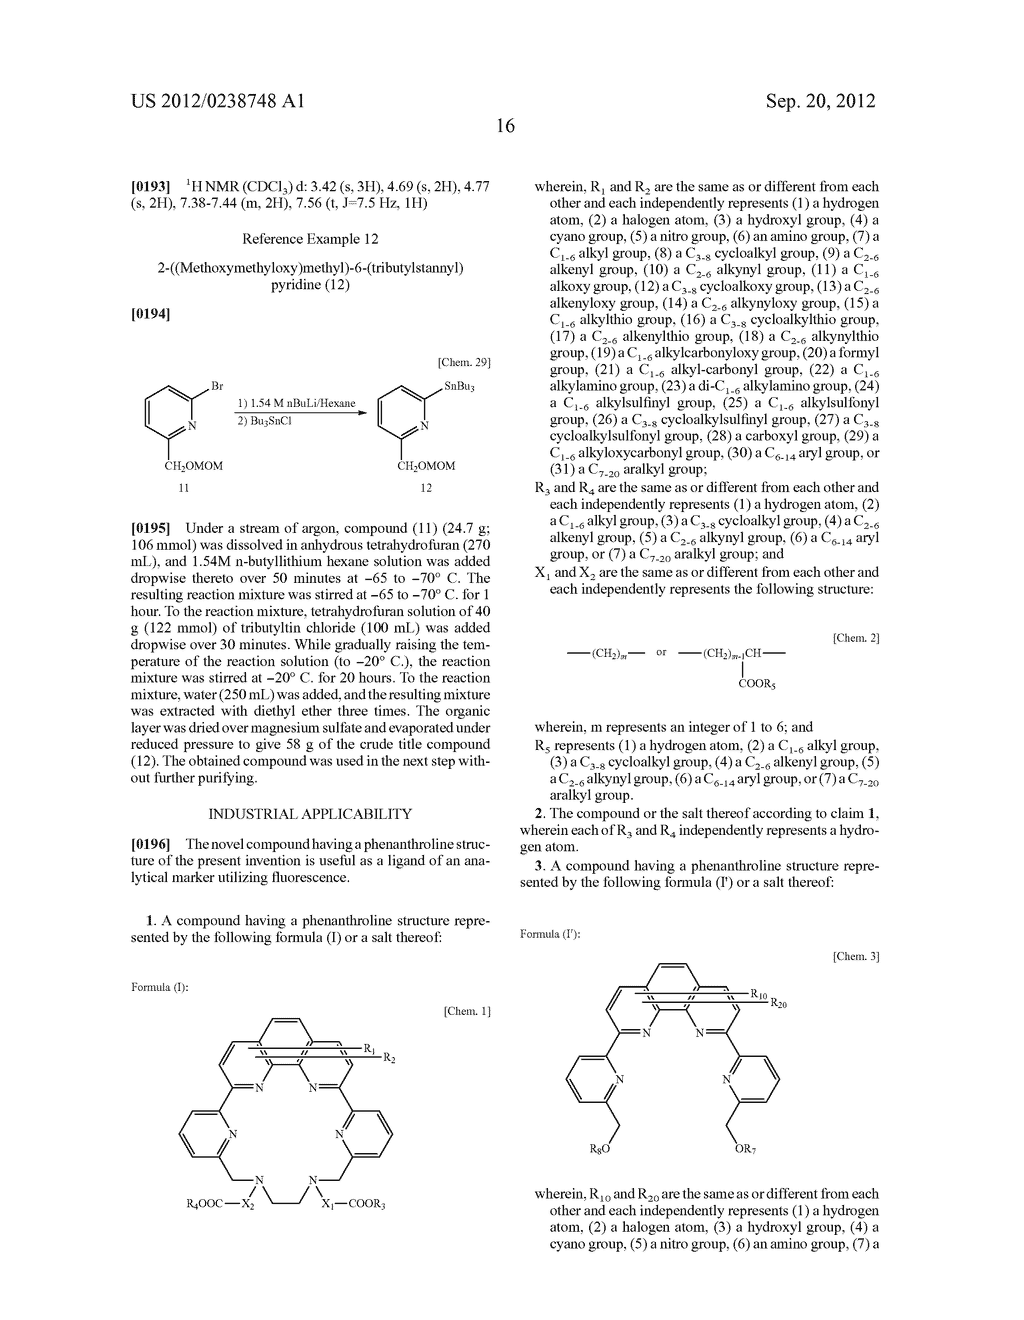 NOVEL COMPOUNDS HAVING PHENANTHROLINE STRUCTURE - diagram, schematic, and image 17